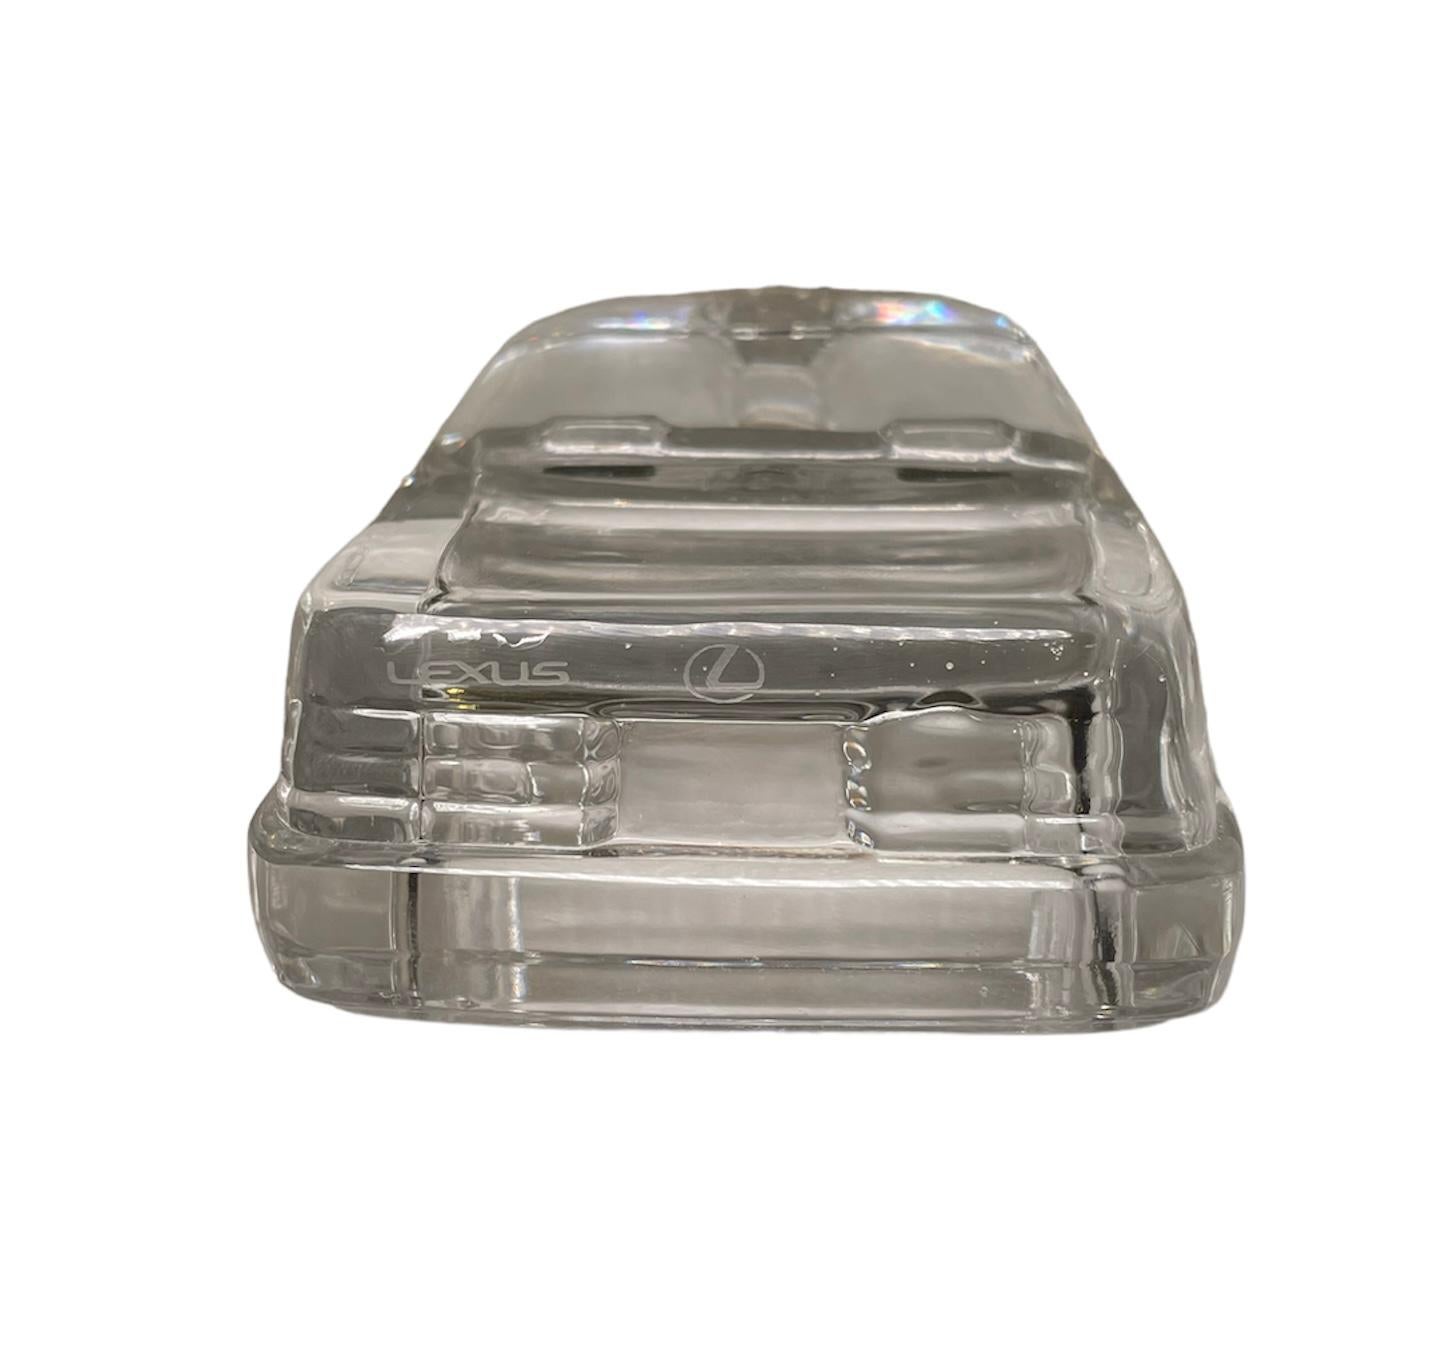 1989-90’s Clear Crystal Lexus LS 400 Car Paperweight For Sale 8